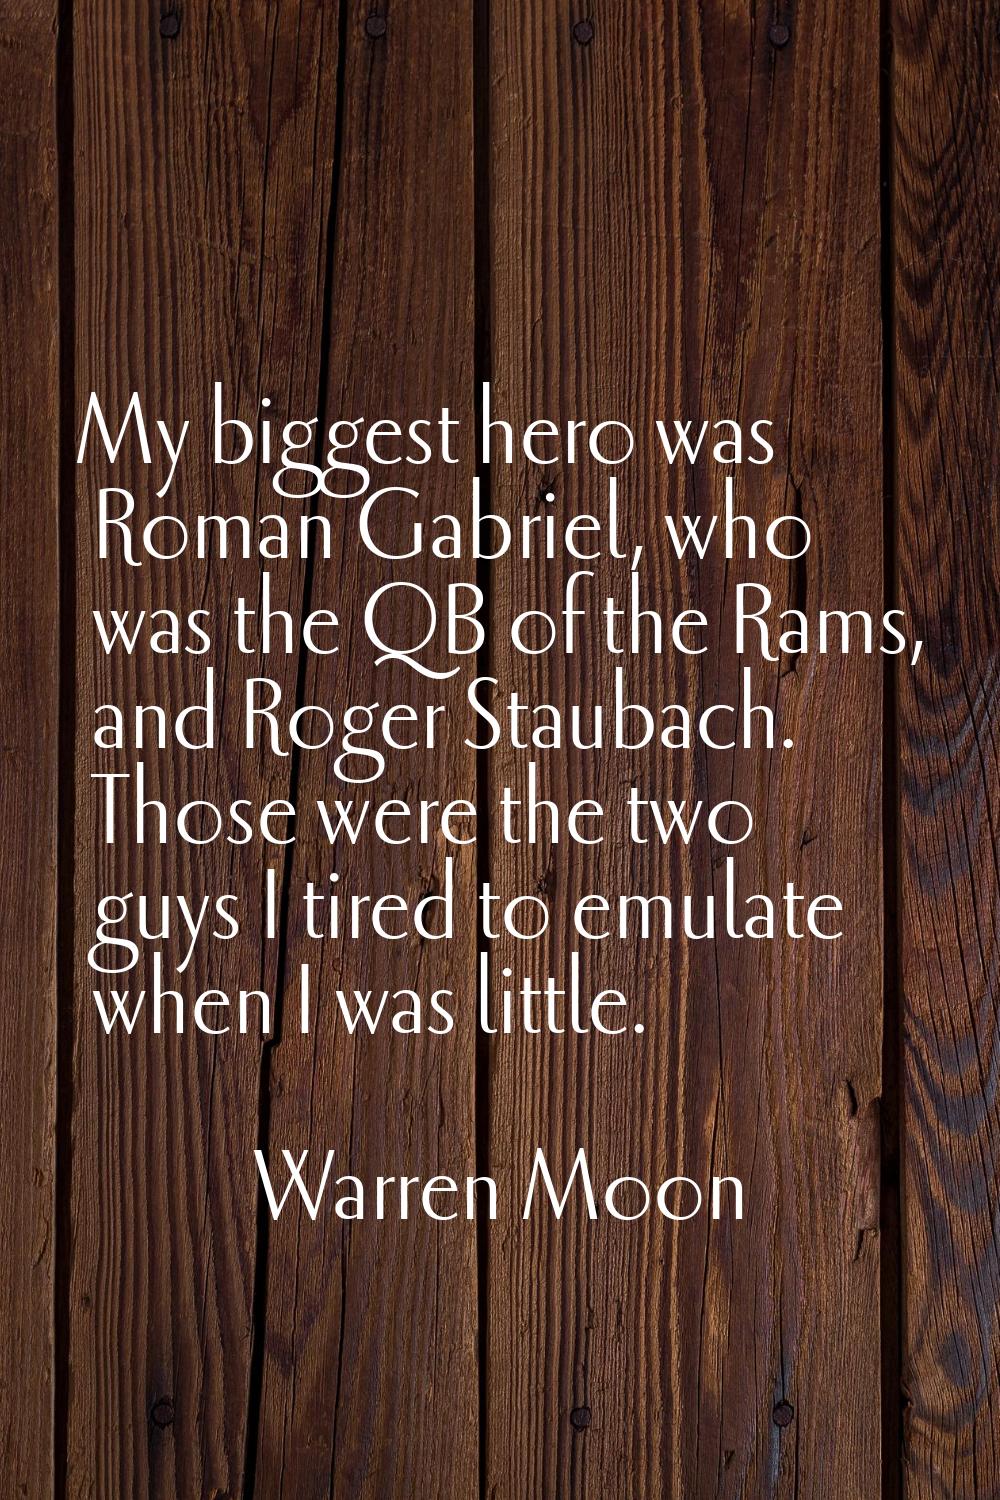 My biggest hero was Roman Gabriel, who was the QB of the Rams, and Roger Staubach. Those were the t